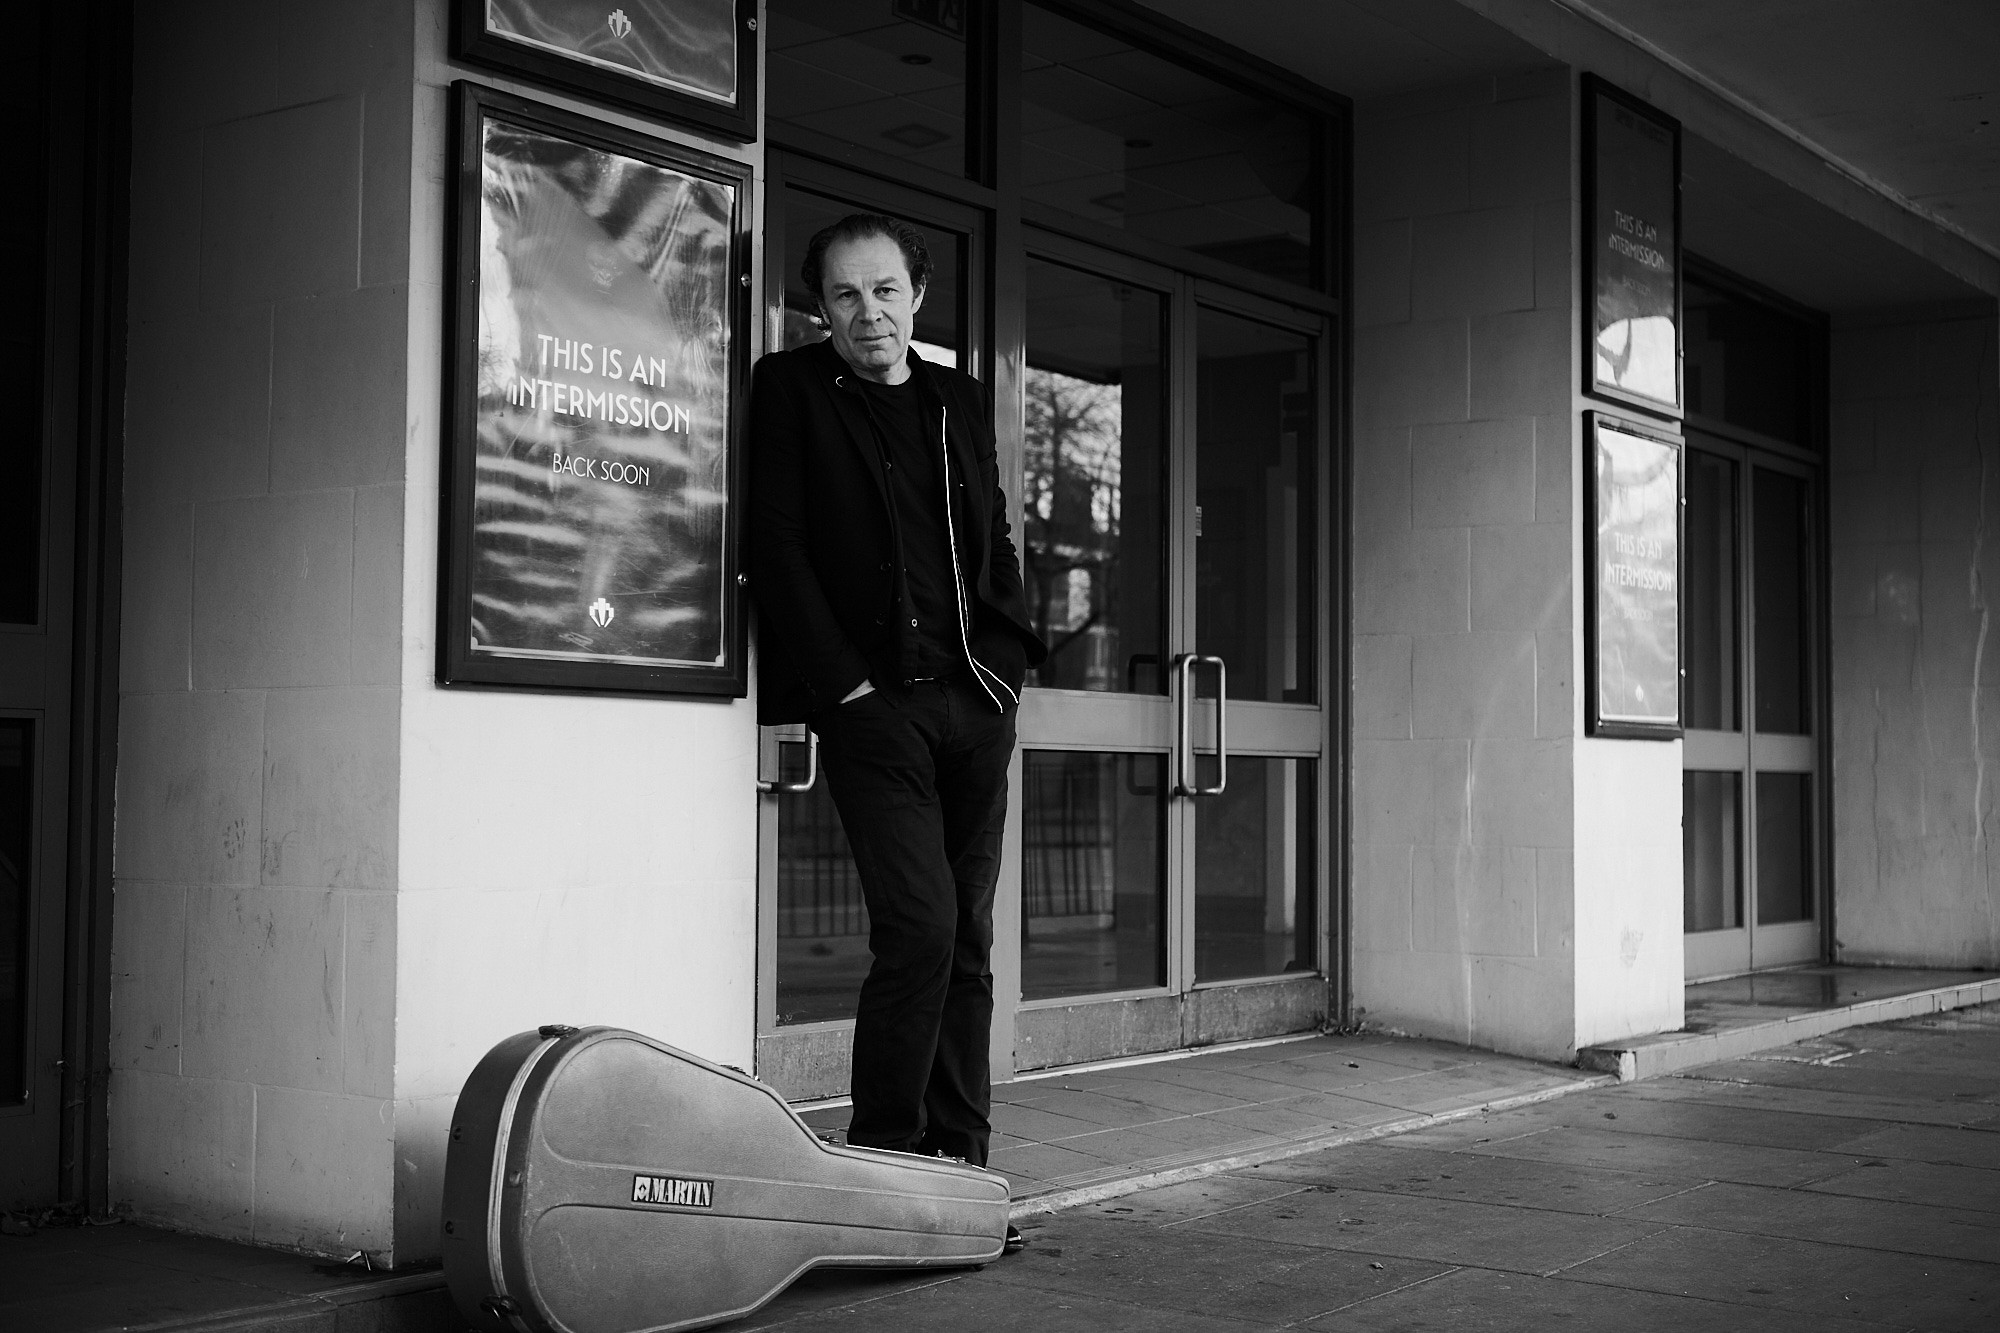 Charlie James leaning on the wall with guitar case on the floor